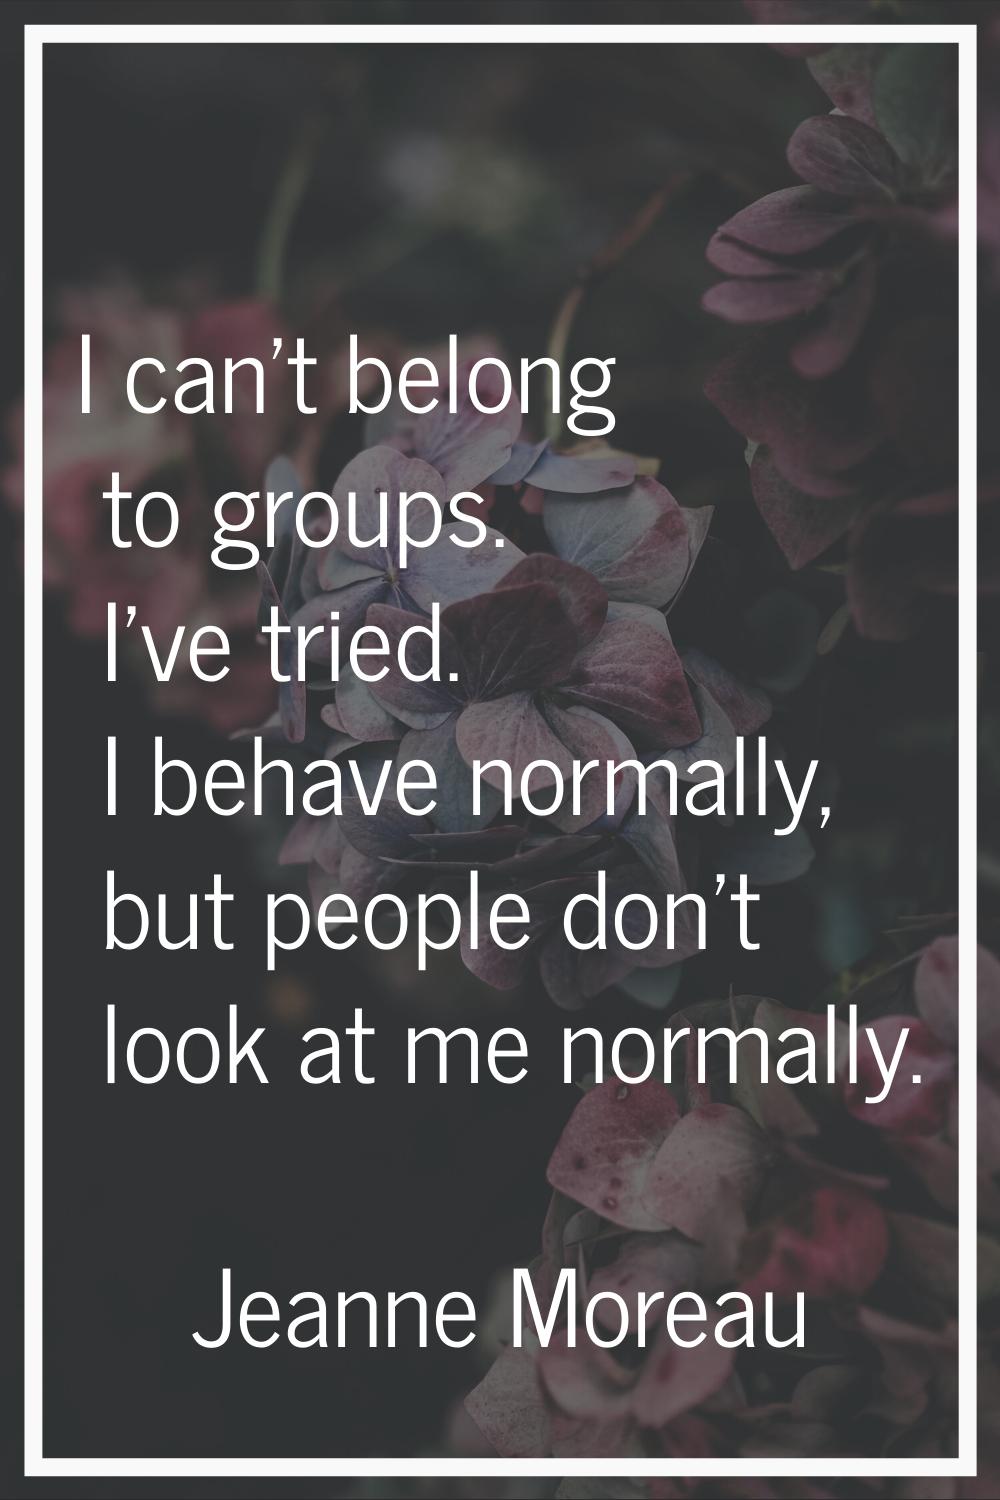 I can't belong to groups. I've tried. I behave normally, but people don't look at me normally.